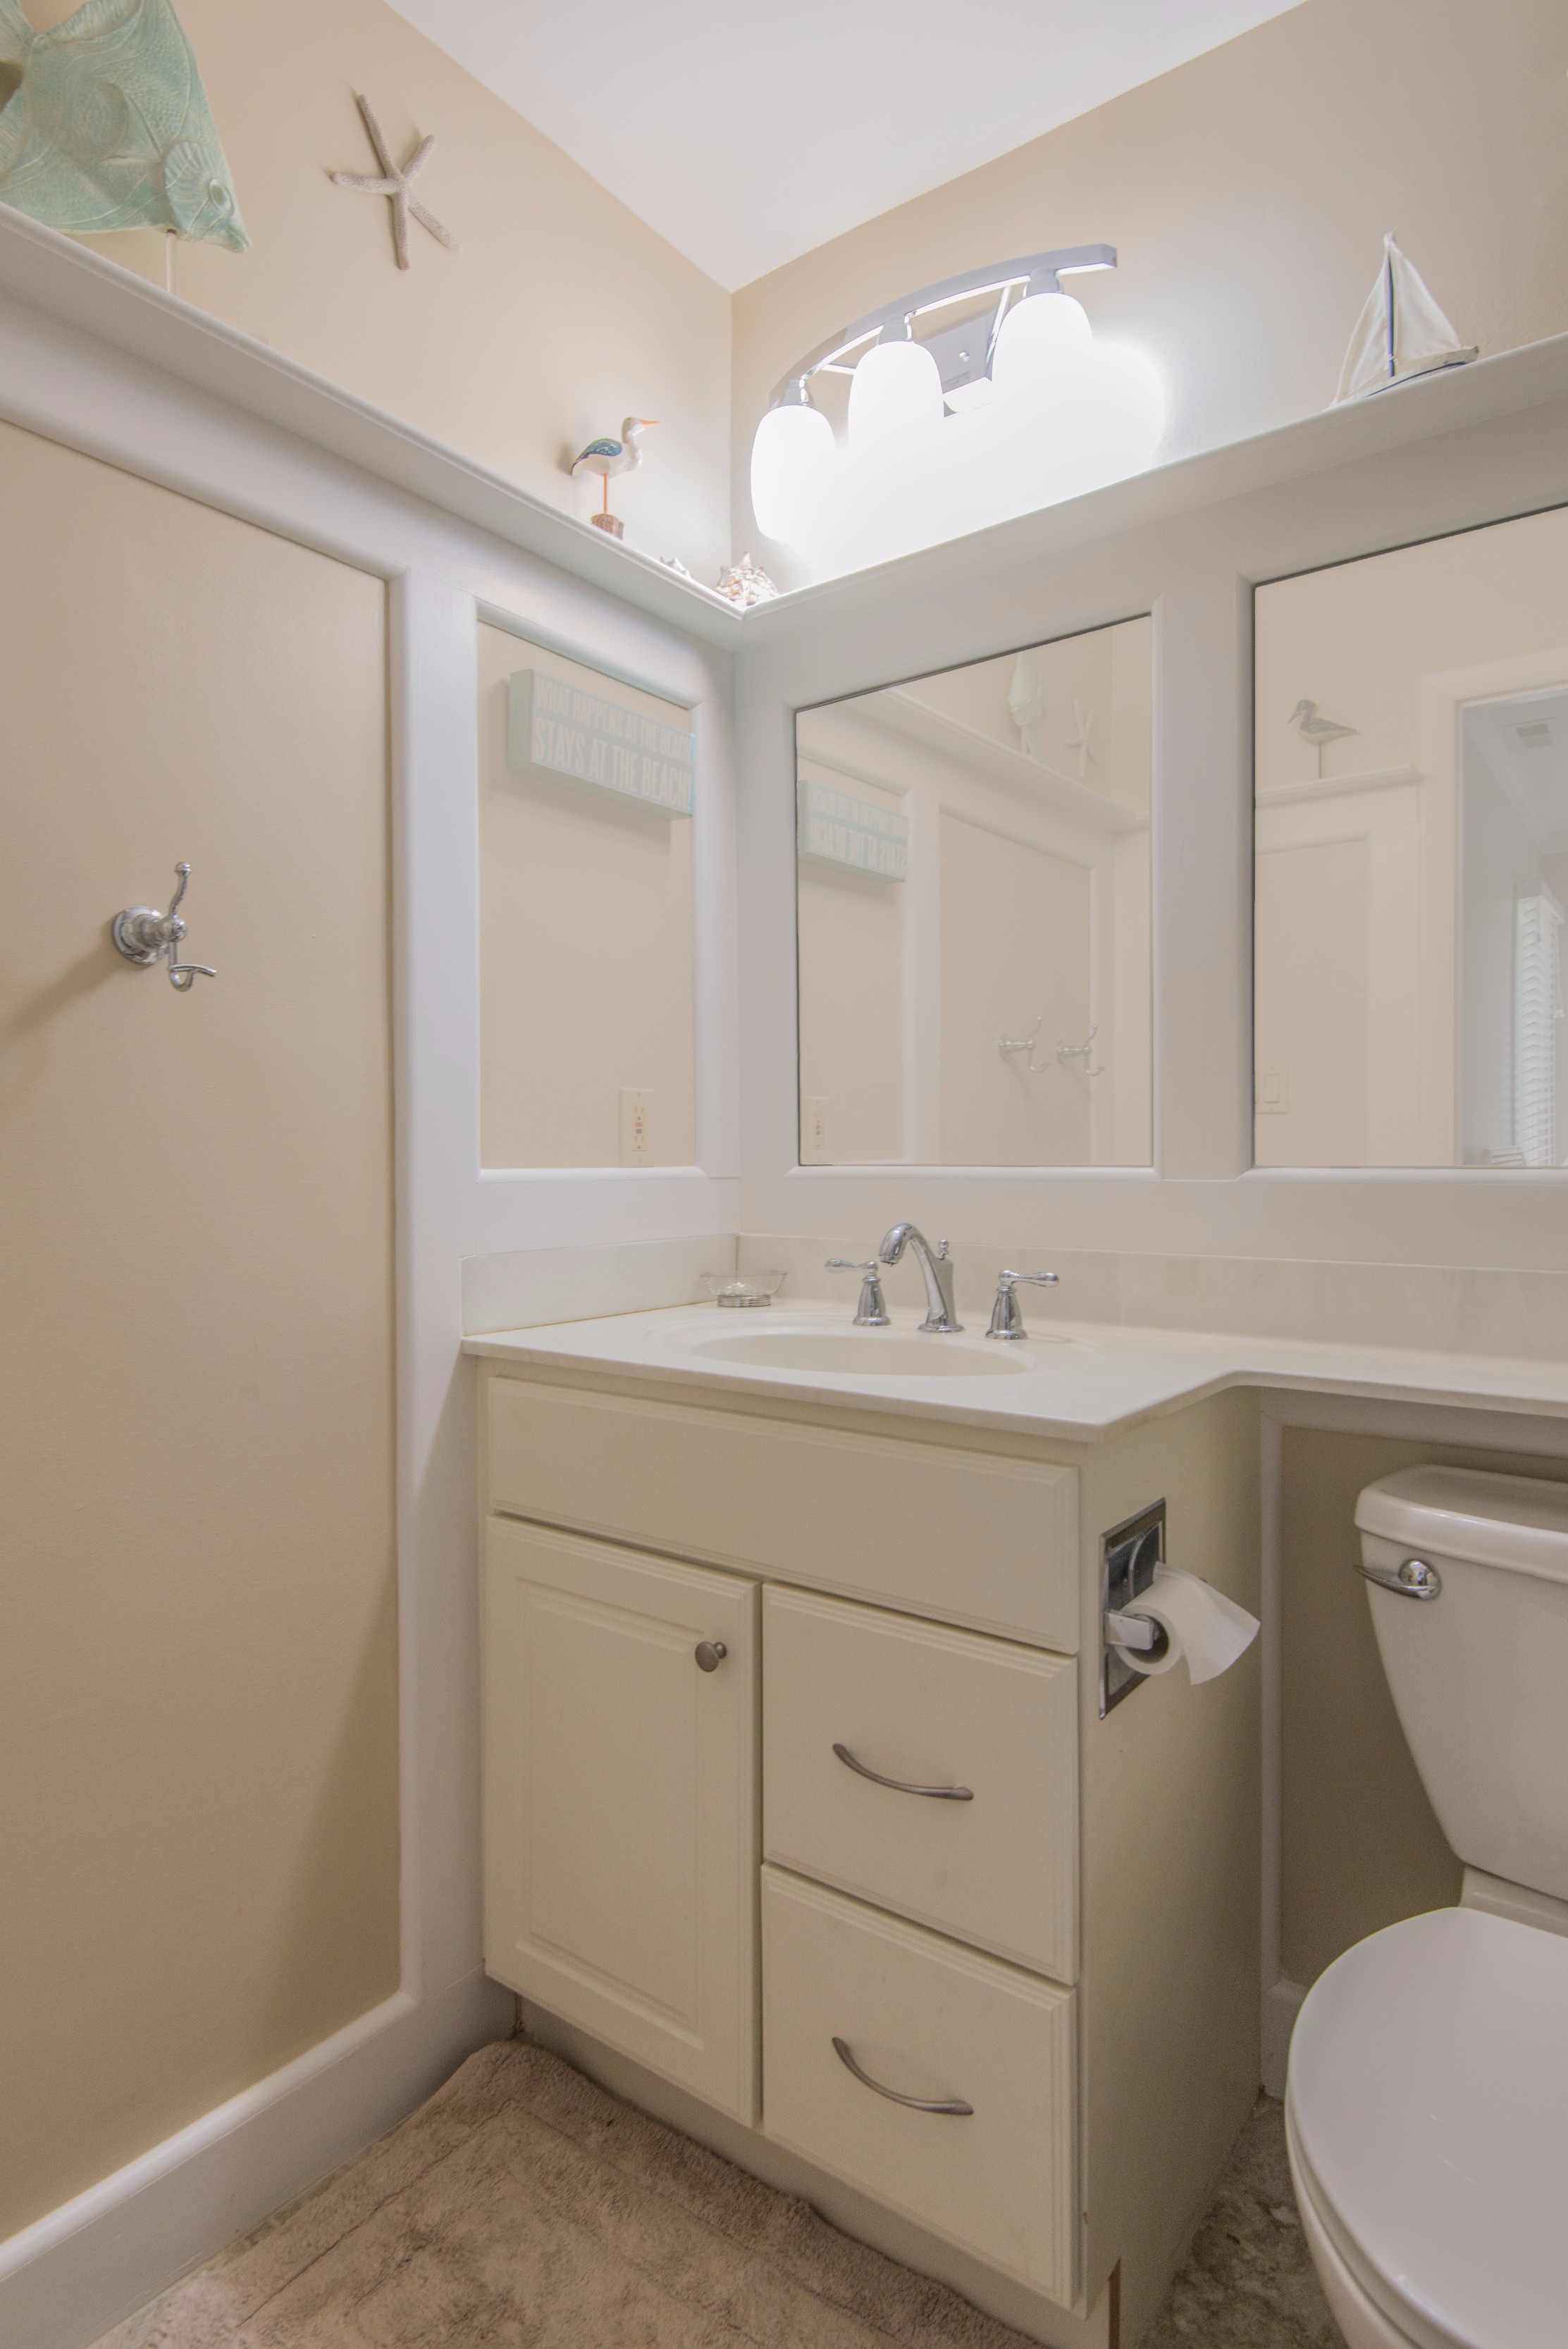 Bathroom Remodel in Kings Grant, Fenwick Island DE with Mantel Above Full Length Mirror and White Vanity With White Top